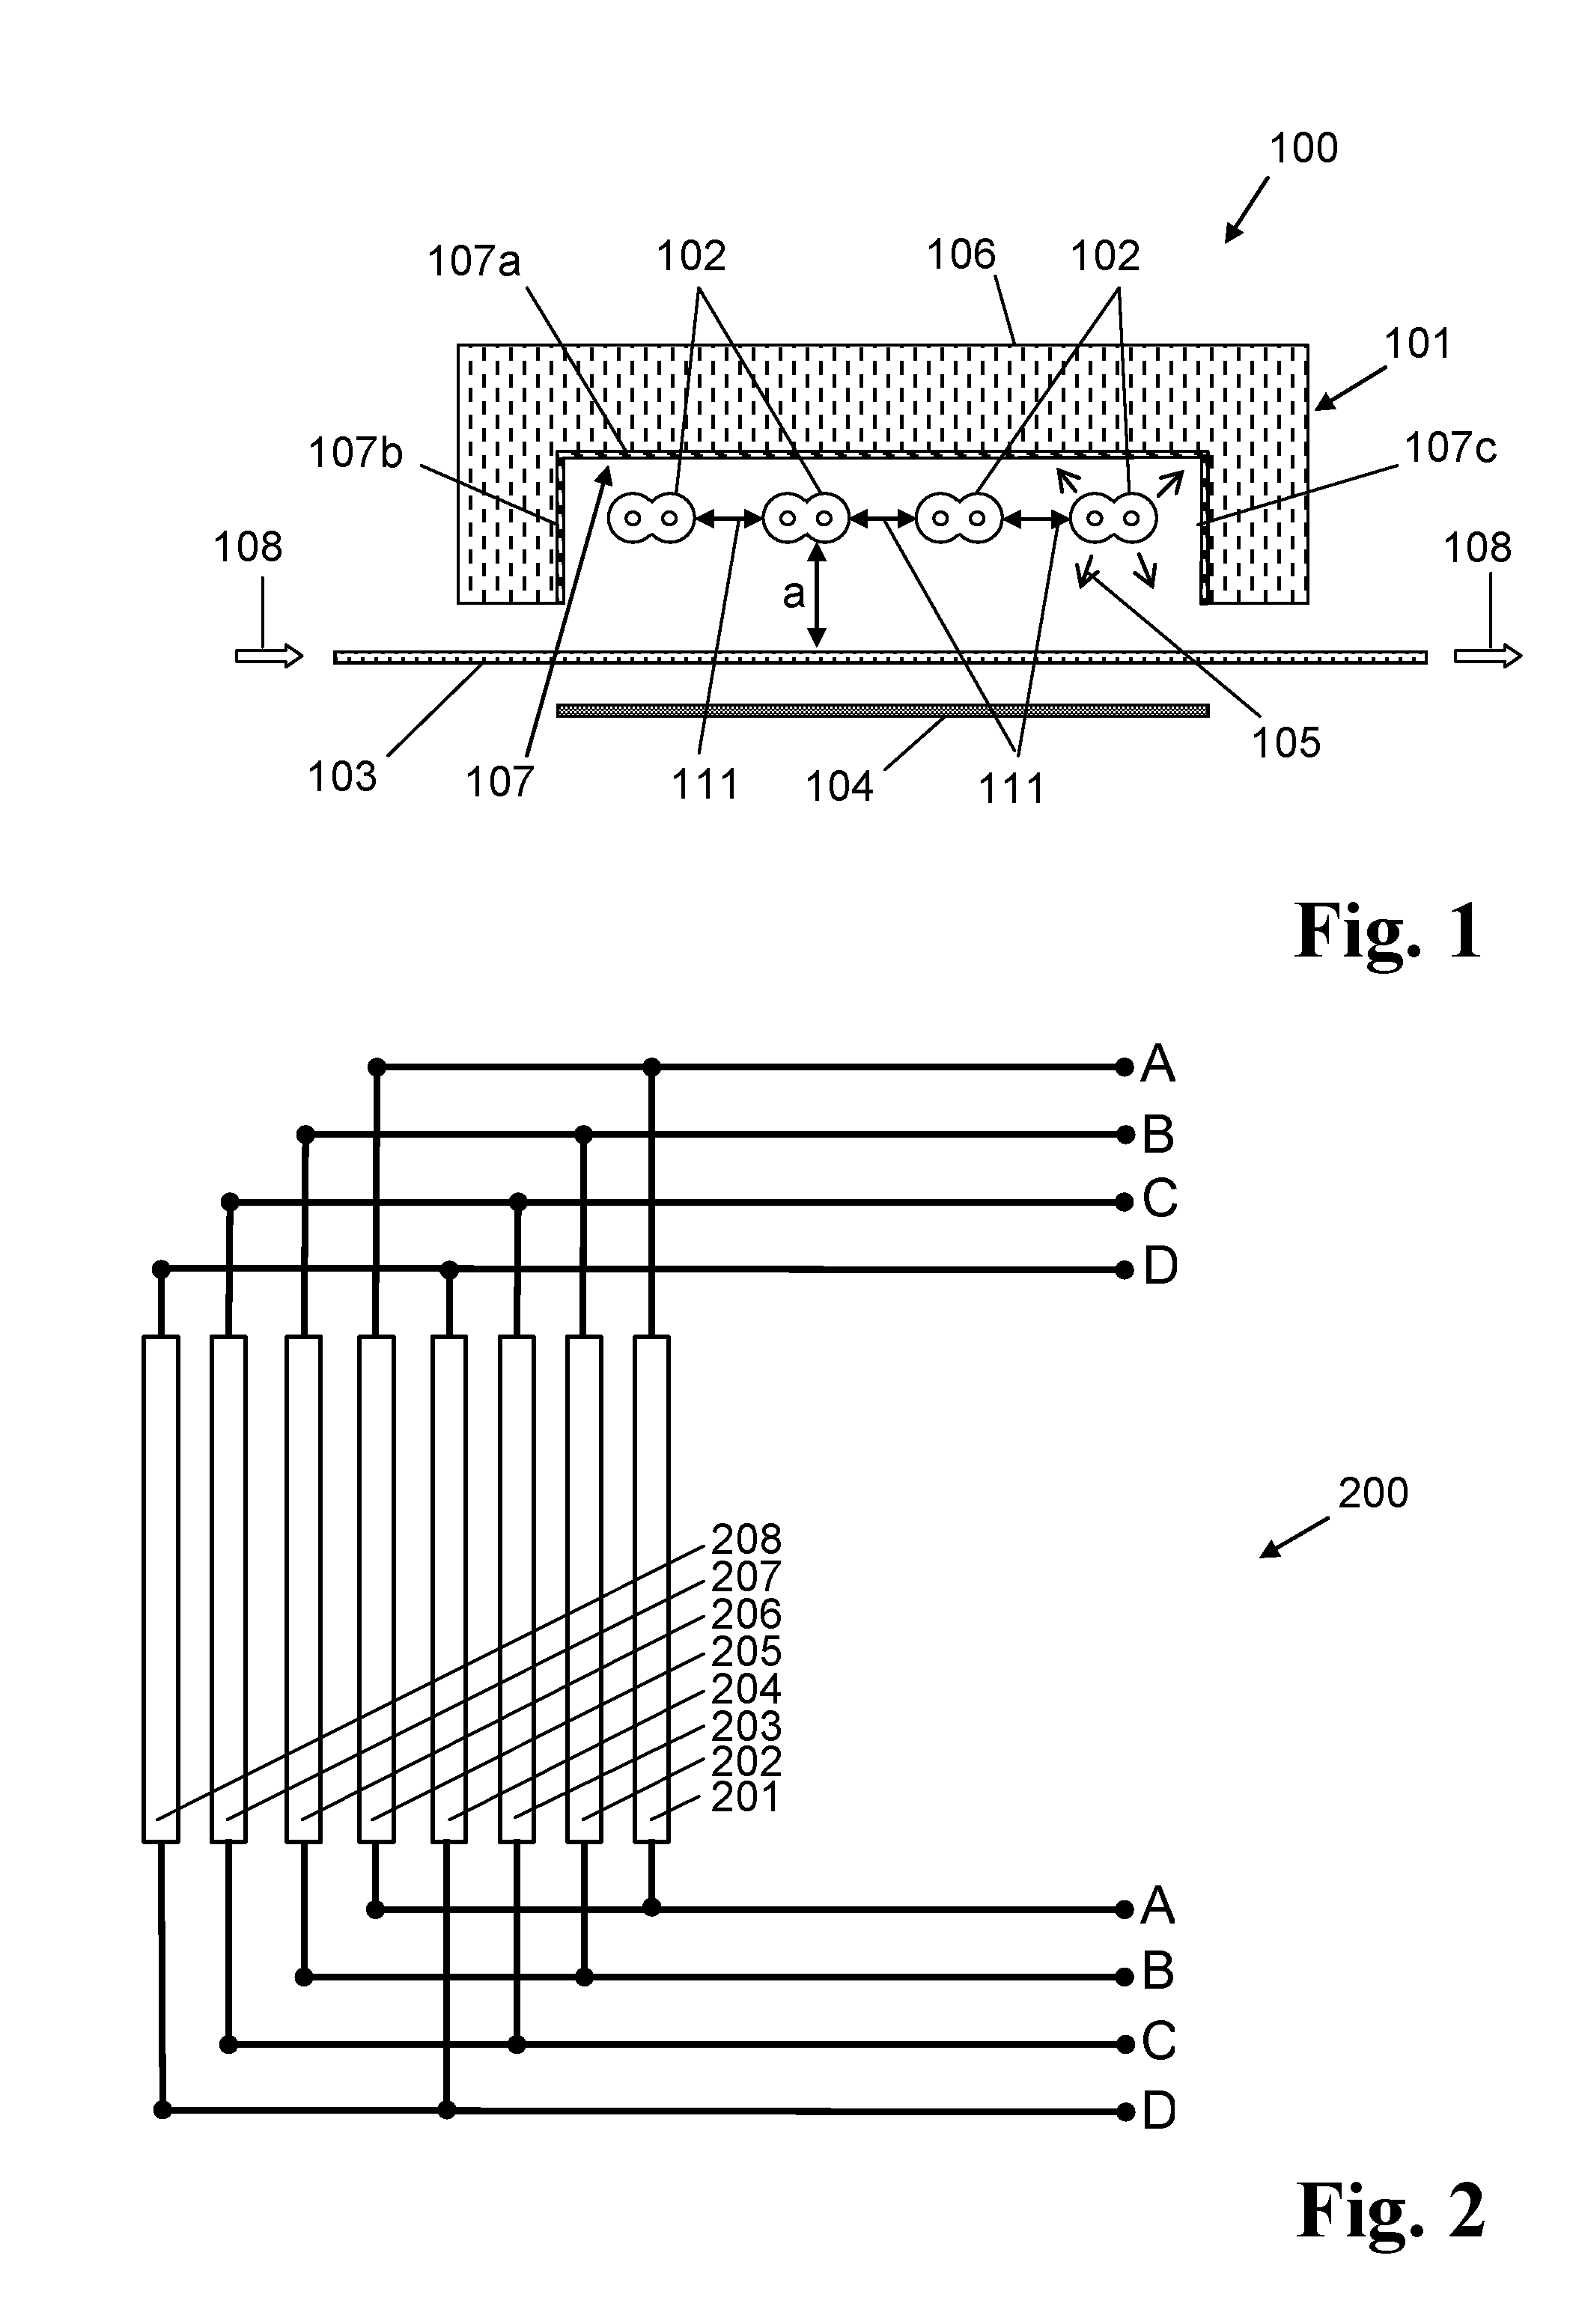 Operating method and device for irradiating a substrate